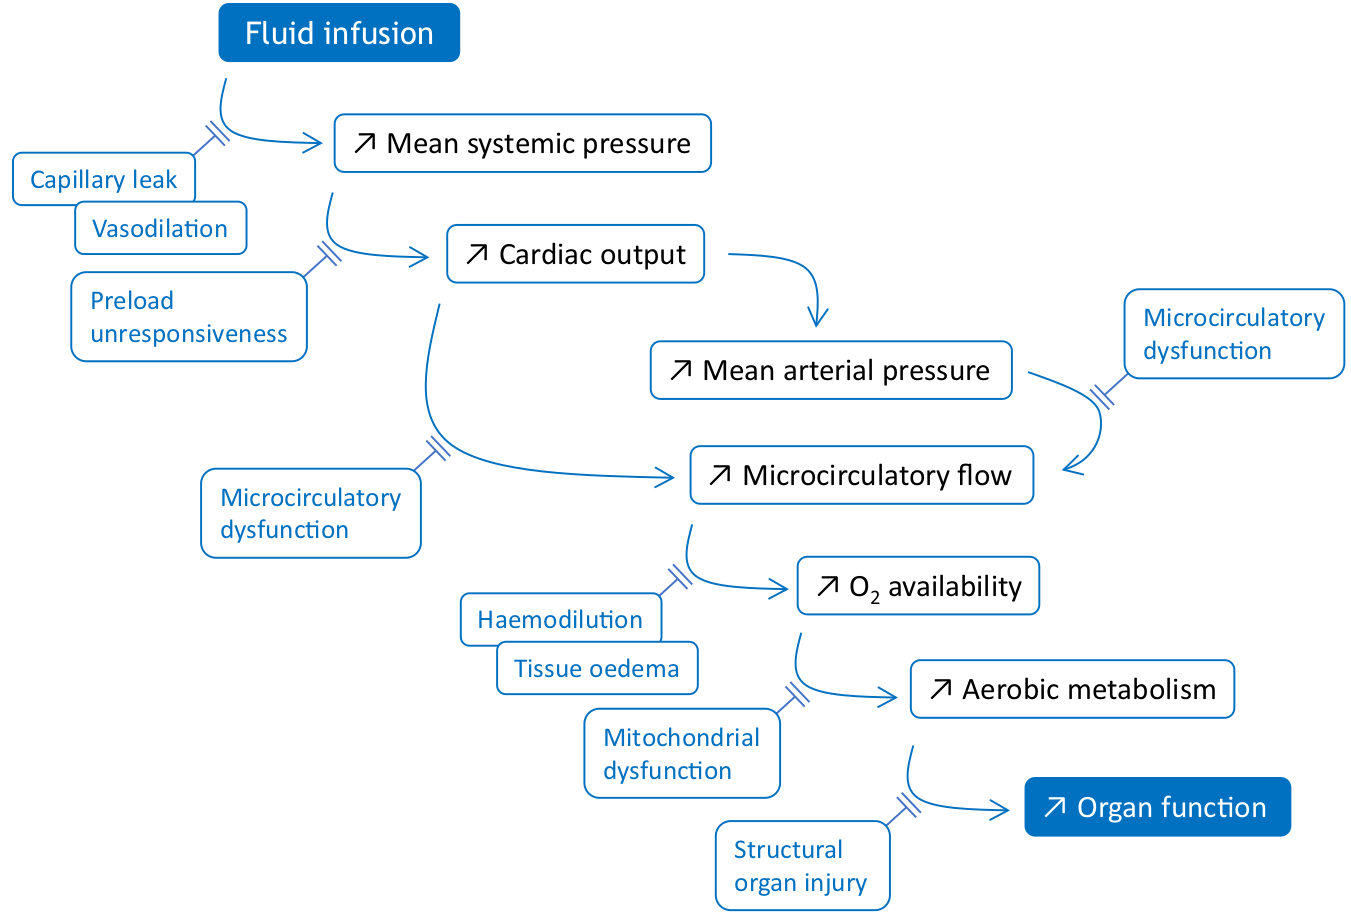 Illustration of the physiological steps from fluid administration to benefit. Reprinted from Monnet et al., 2018 [8] (CC BY).